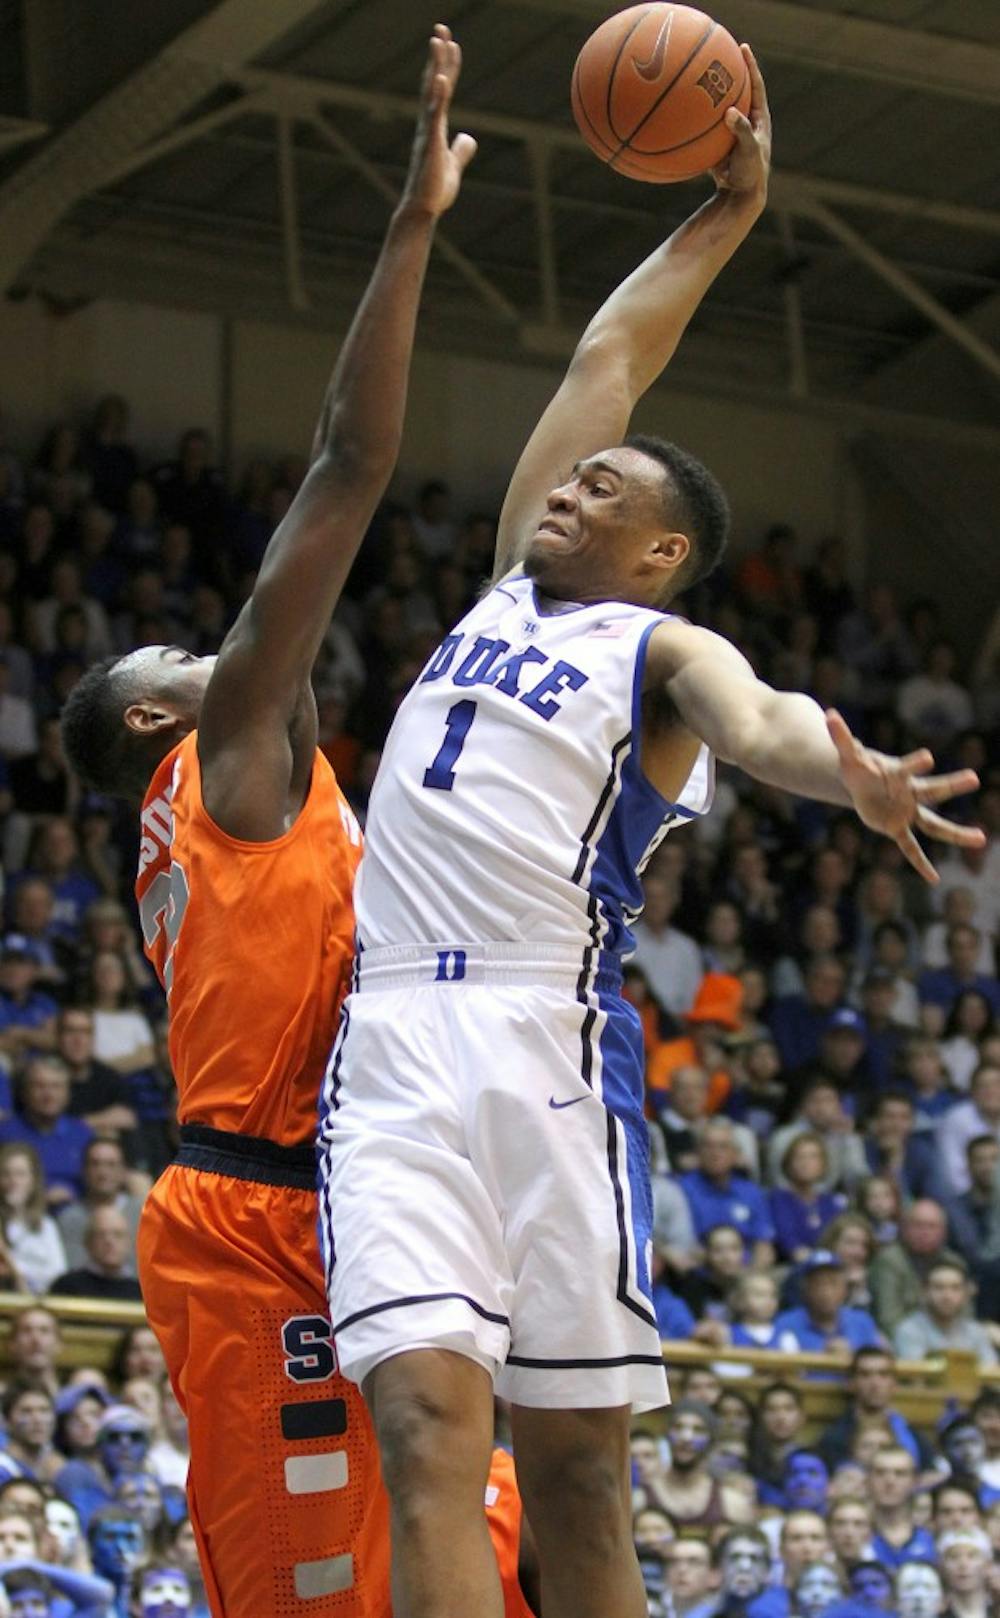 DUKE 66, SYRACUSE 60. The Blue Devils managed to pull off win after a controversial call on a charge by C.J. Fair on Rodney Hood. Check back soon for a full recap of the victory.